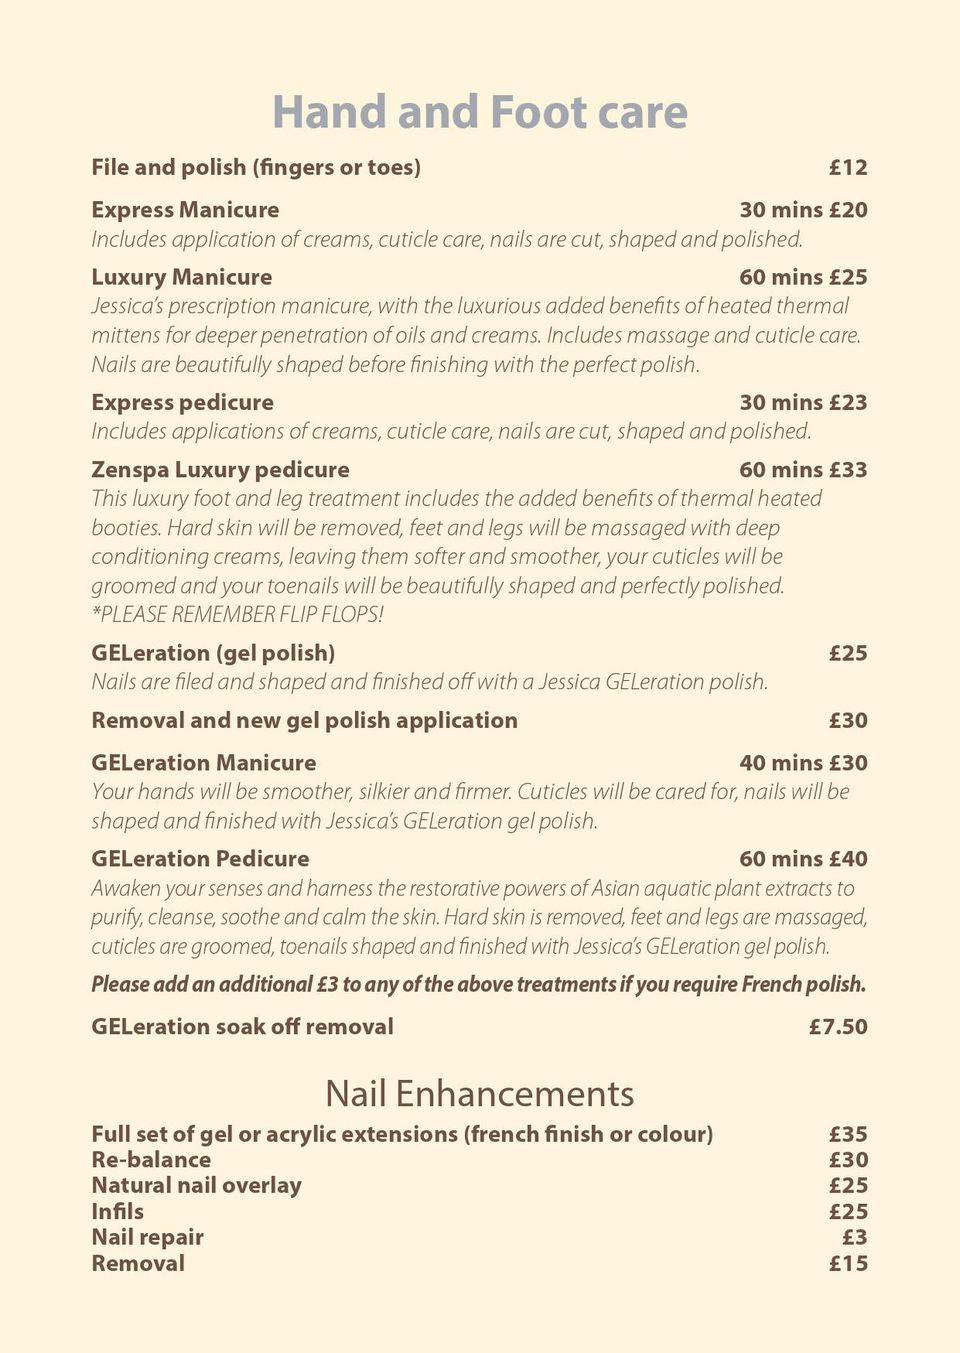 hand and foot care price list